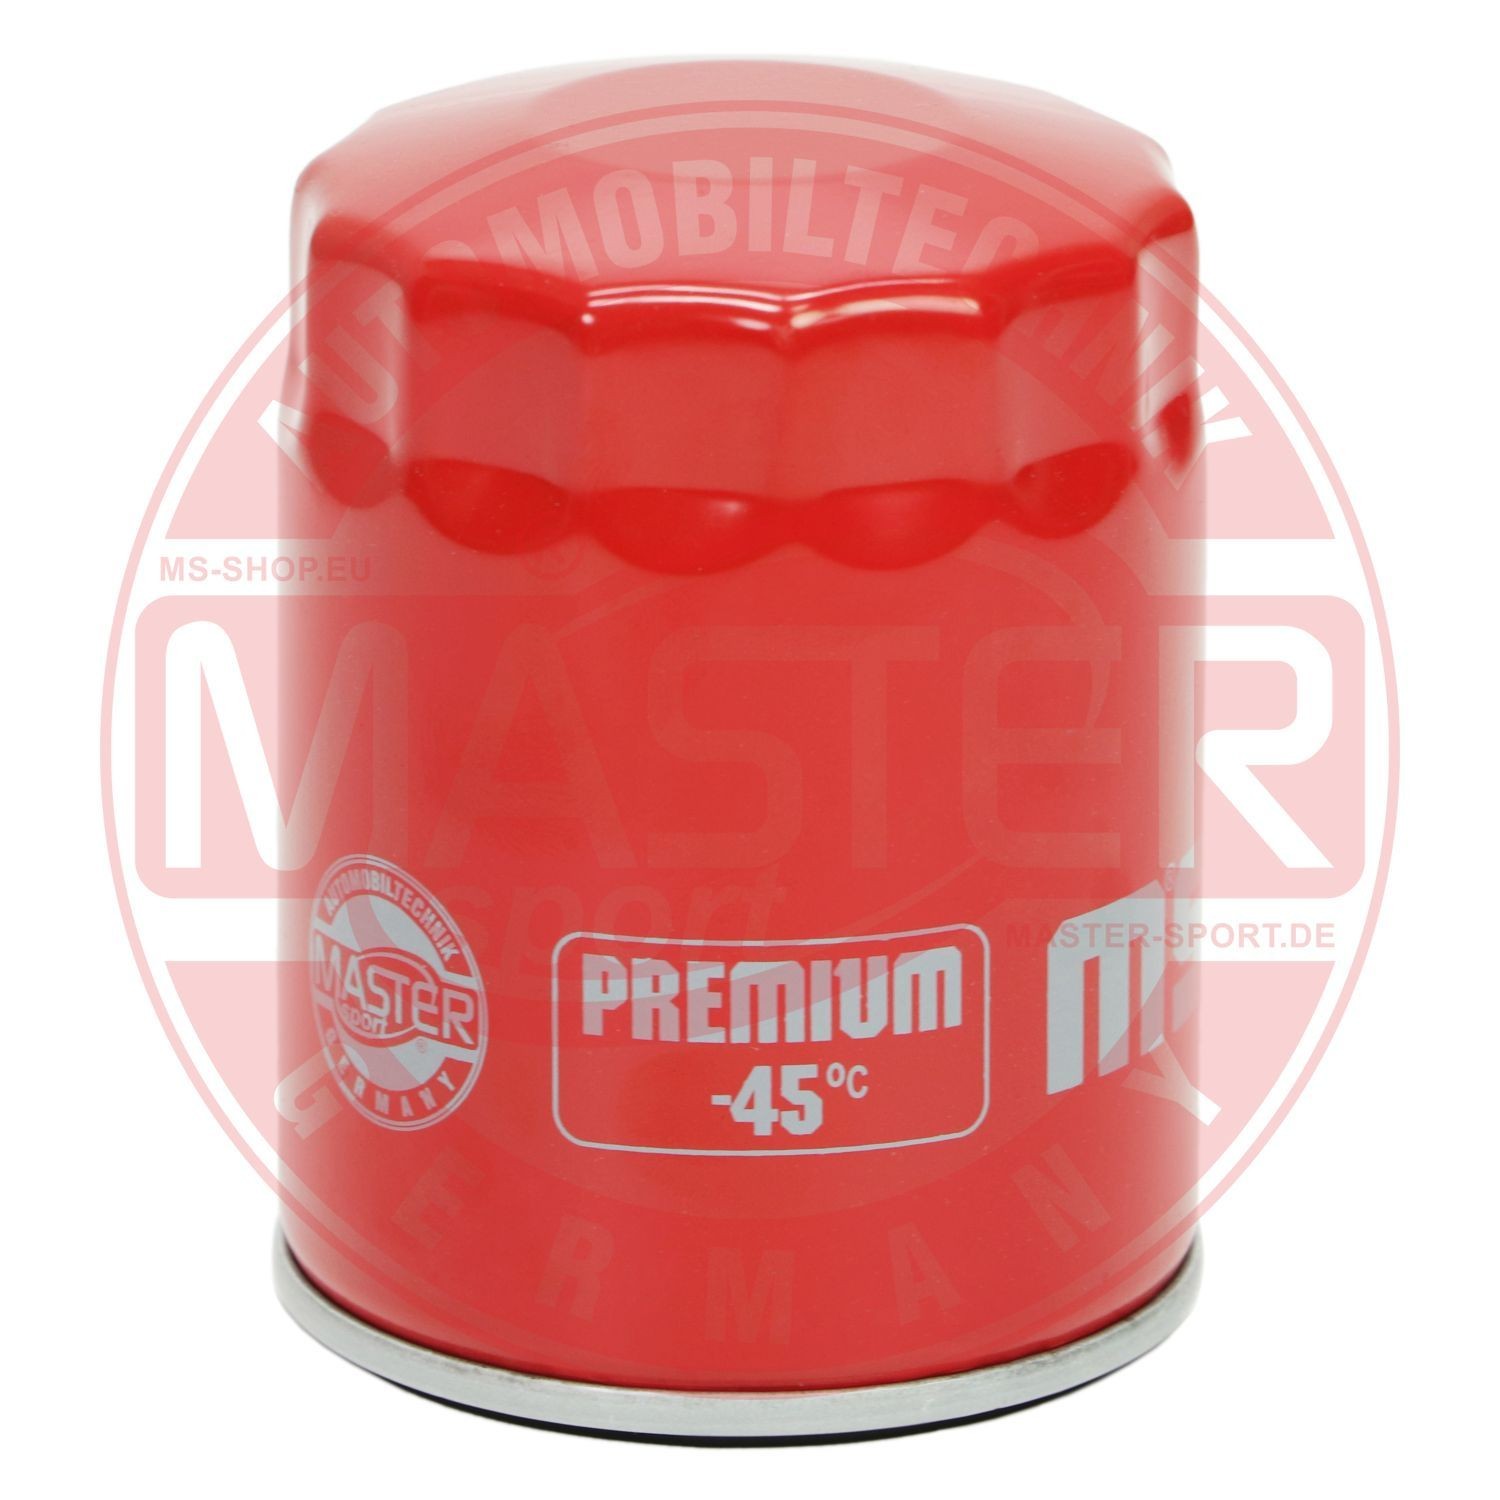 MASTER-SPORT 713/16-OF-PCS-MS Oil filter M 20 X 1.5, with one anti-return valve, Filter Insert